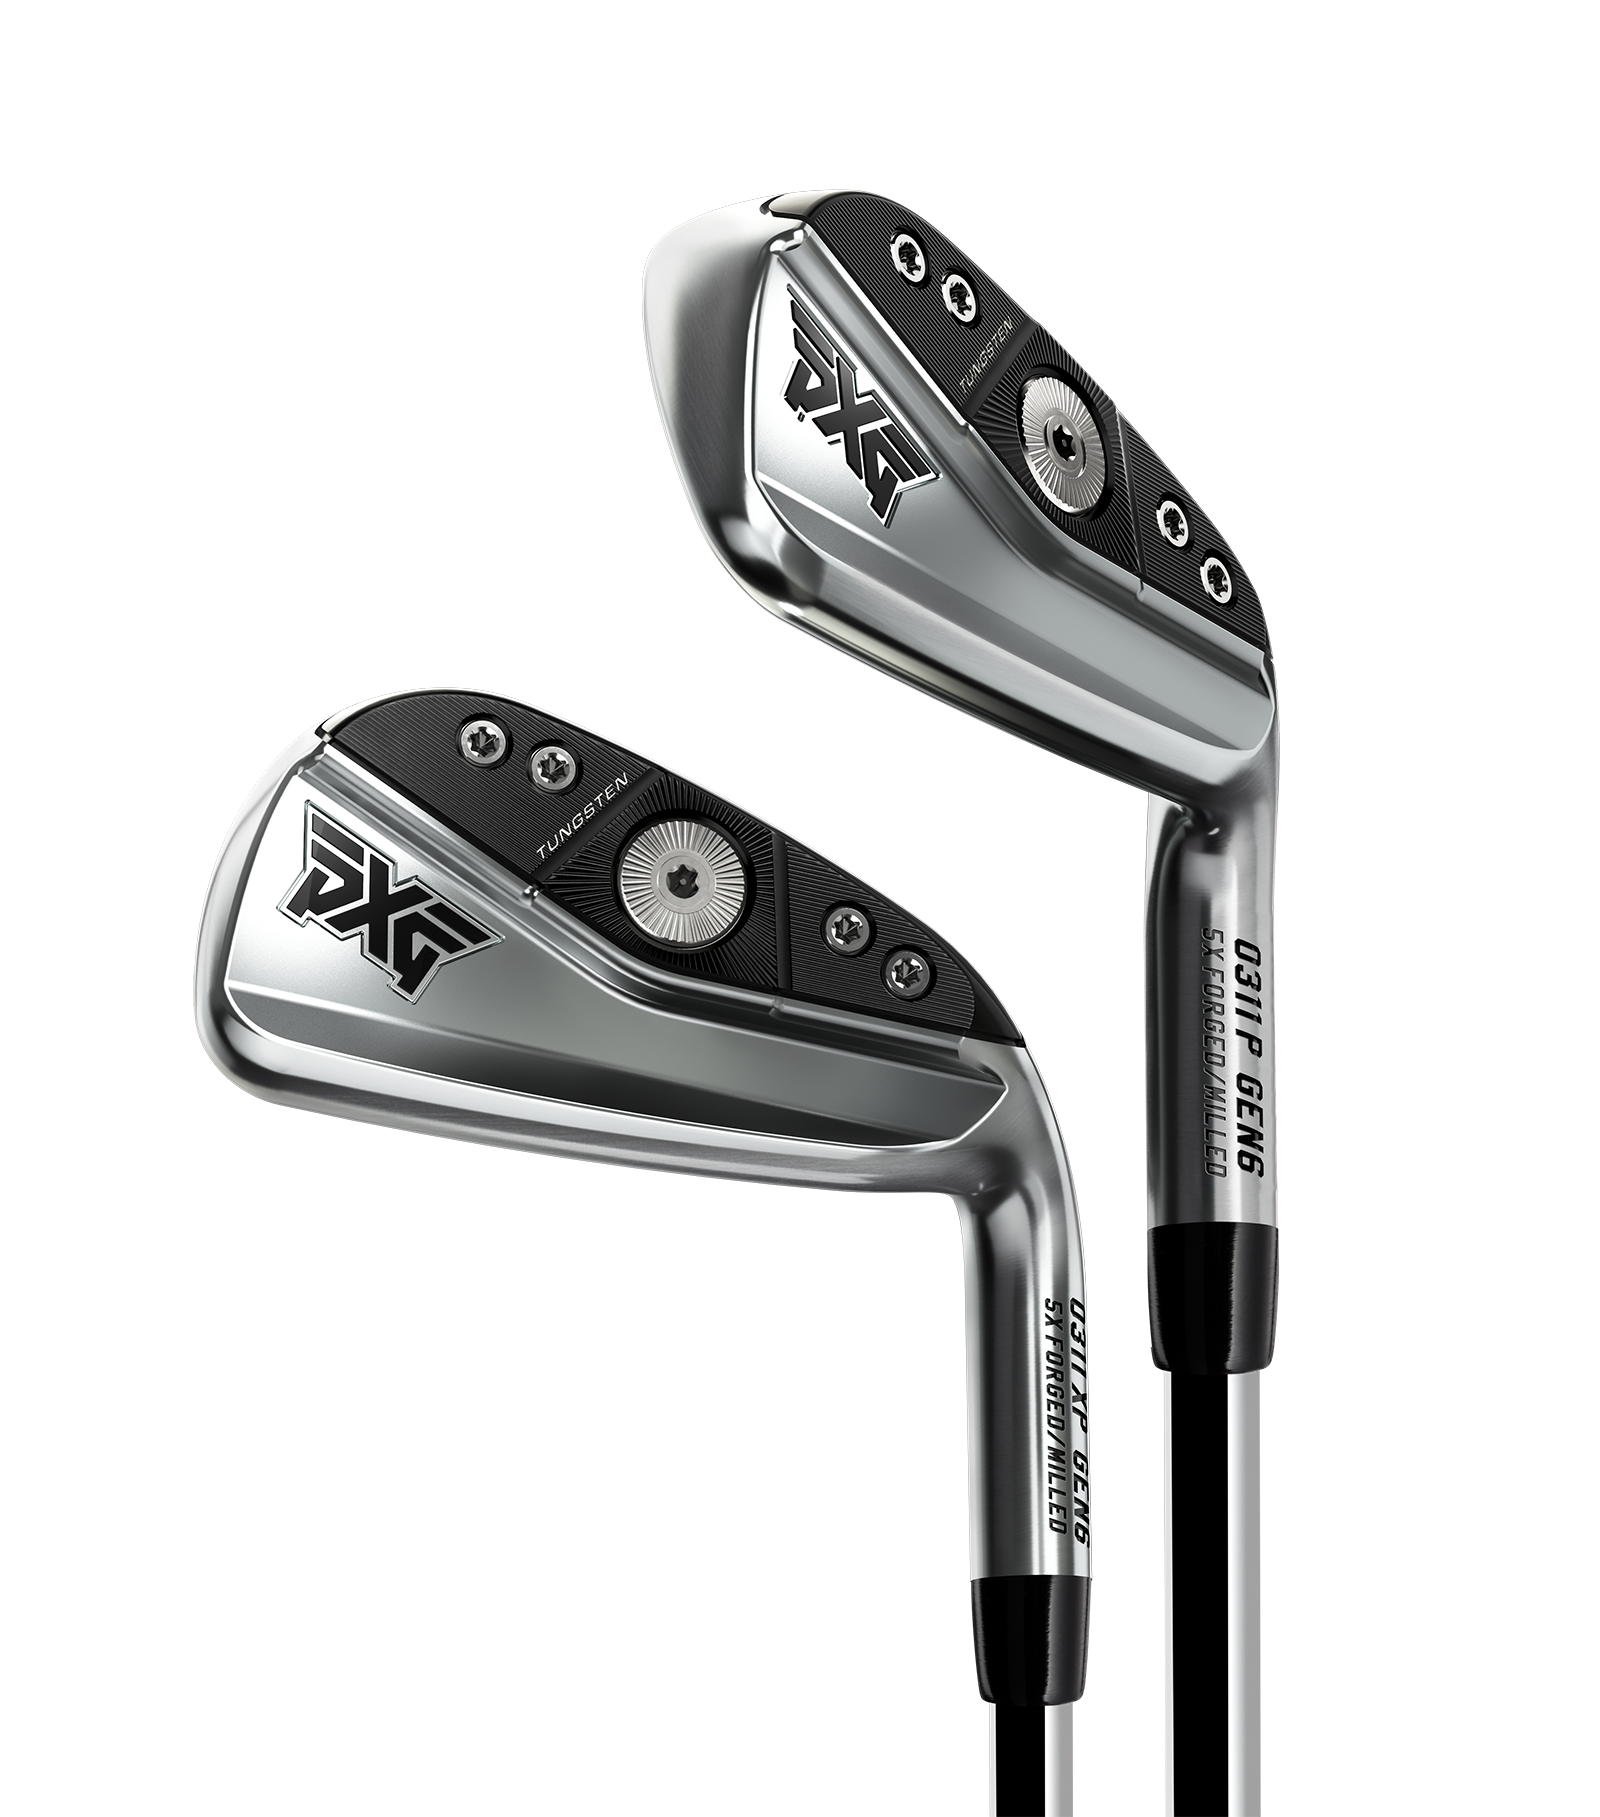 PXG GEN6 0311 irons: What you need to know | Golf Equipment: Clubs